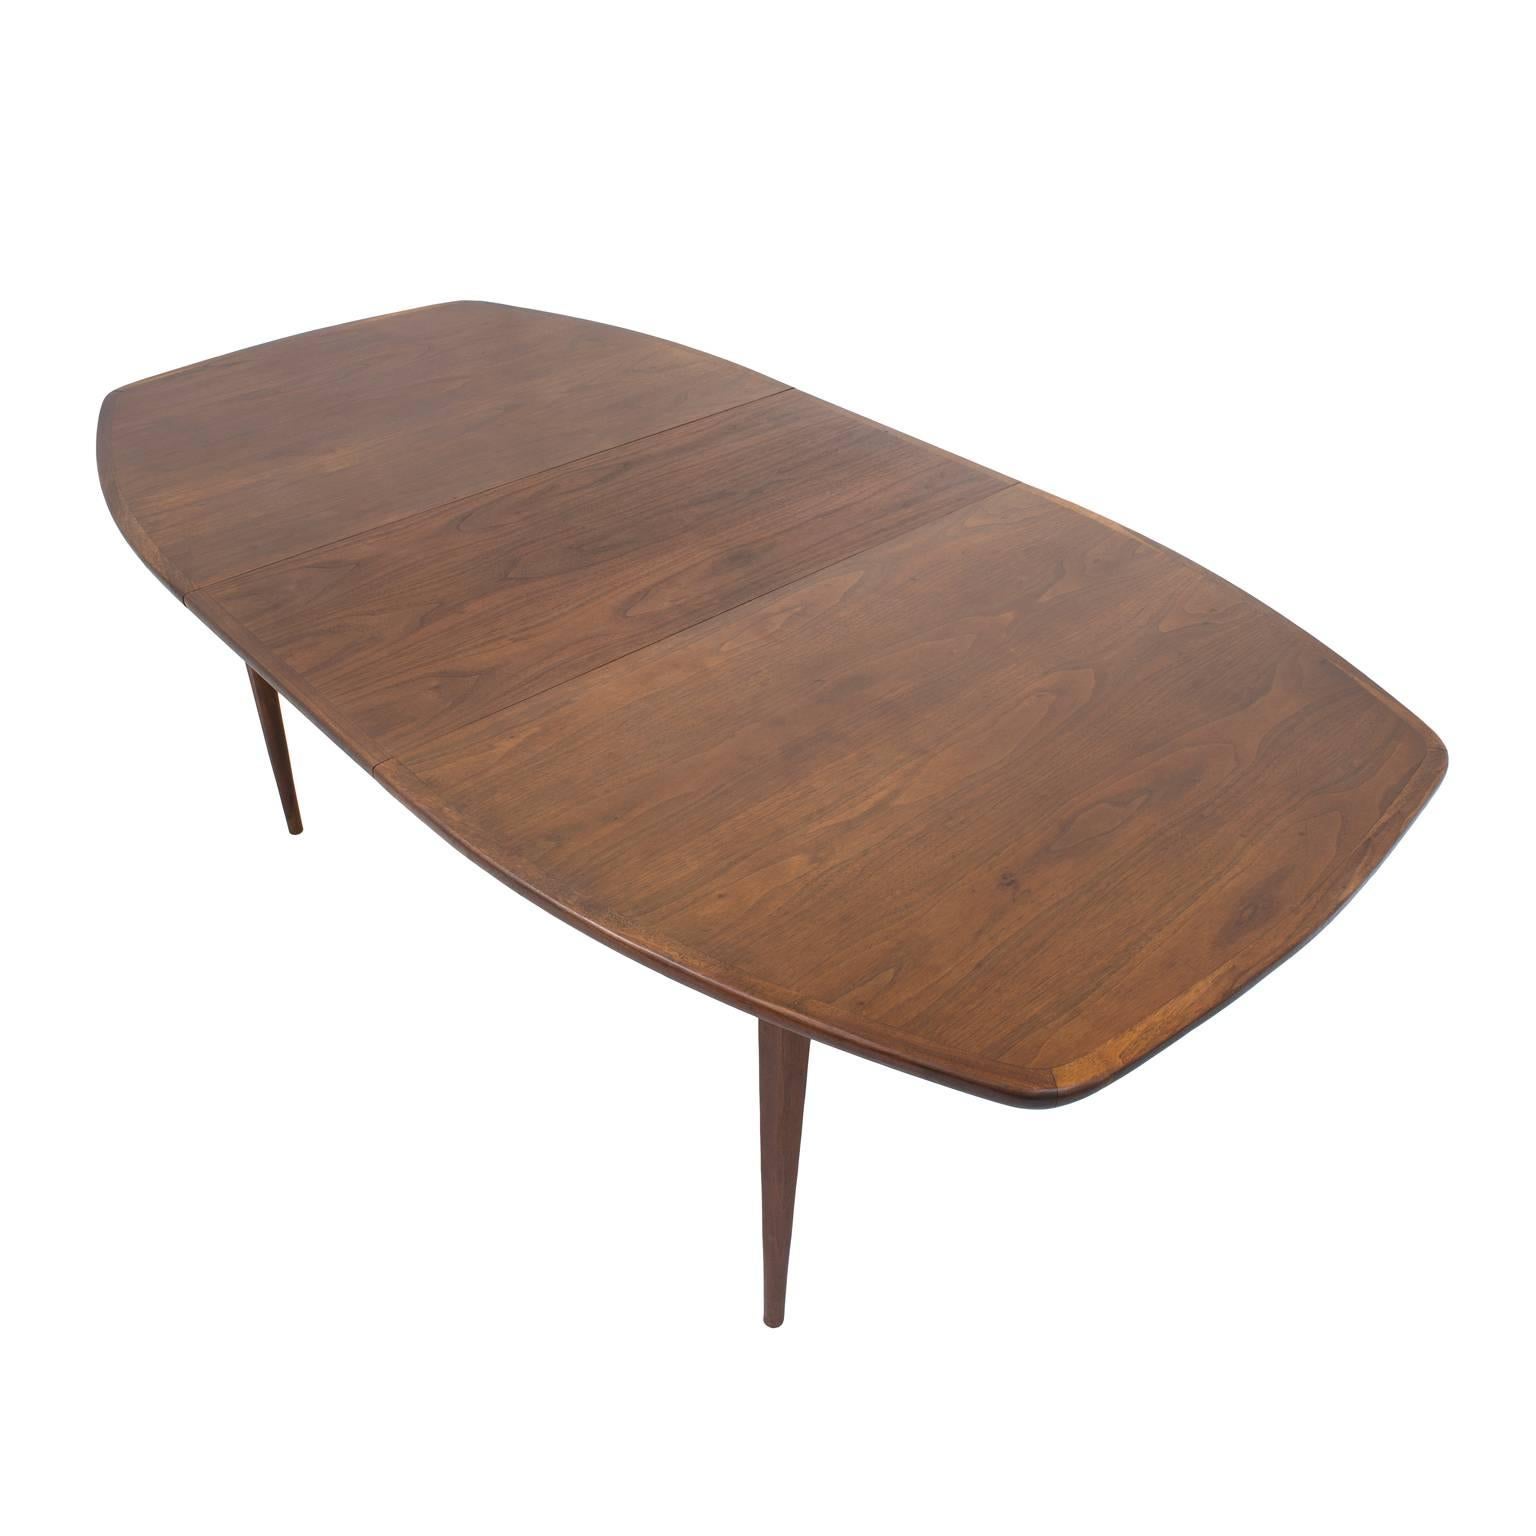 Late 20th Century Mid-Century Solid Walnut Dining Table by Dillingham Attributed to Milo Baughman For Sale